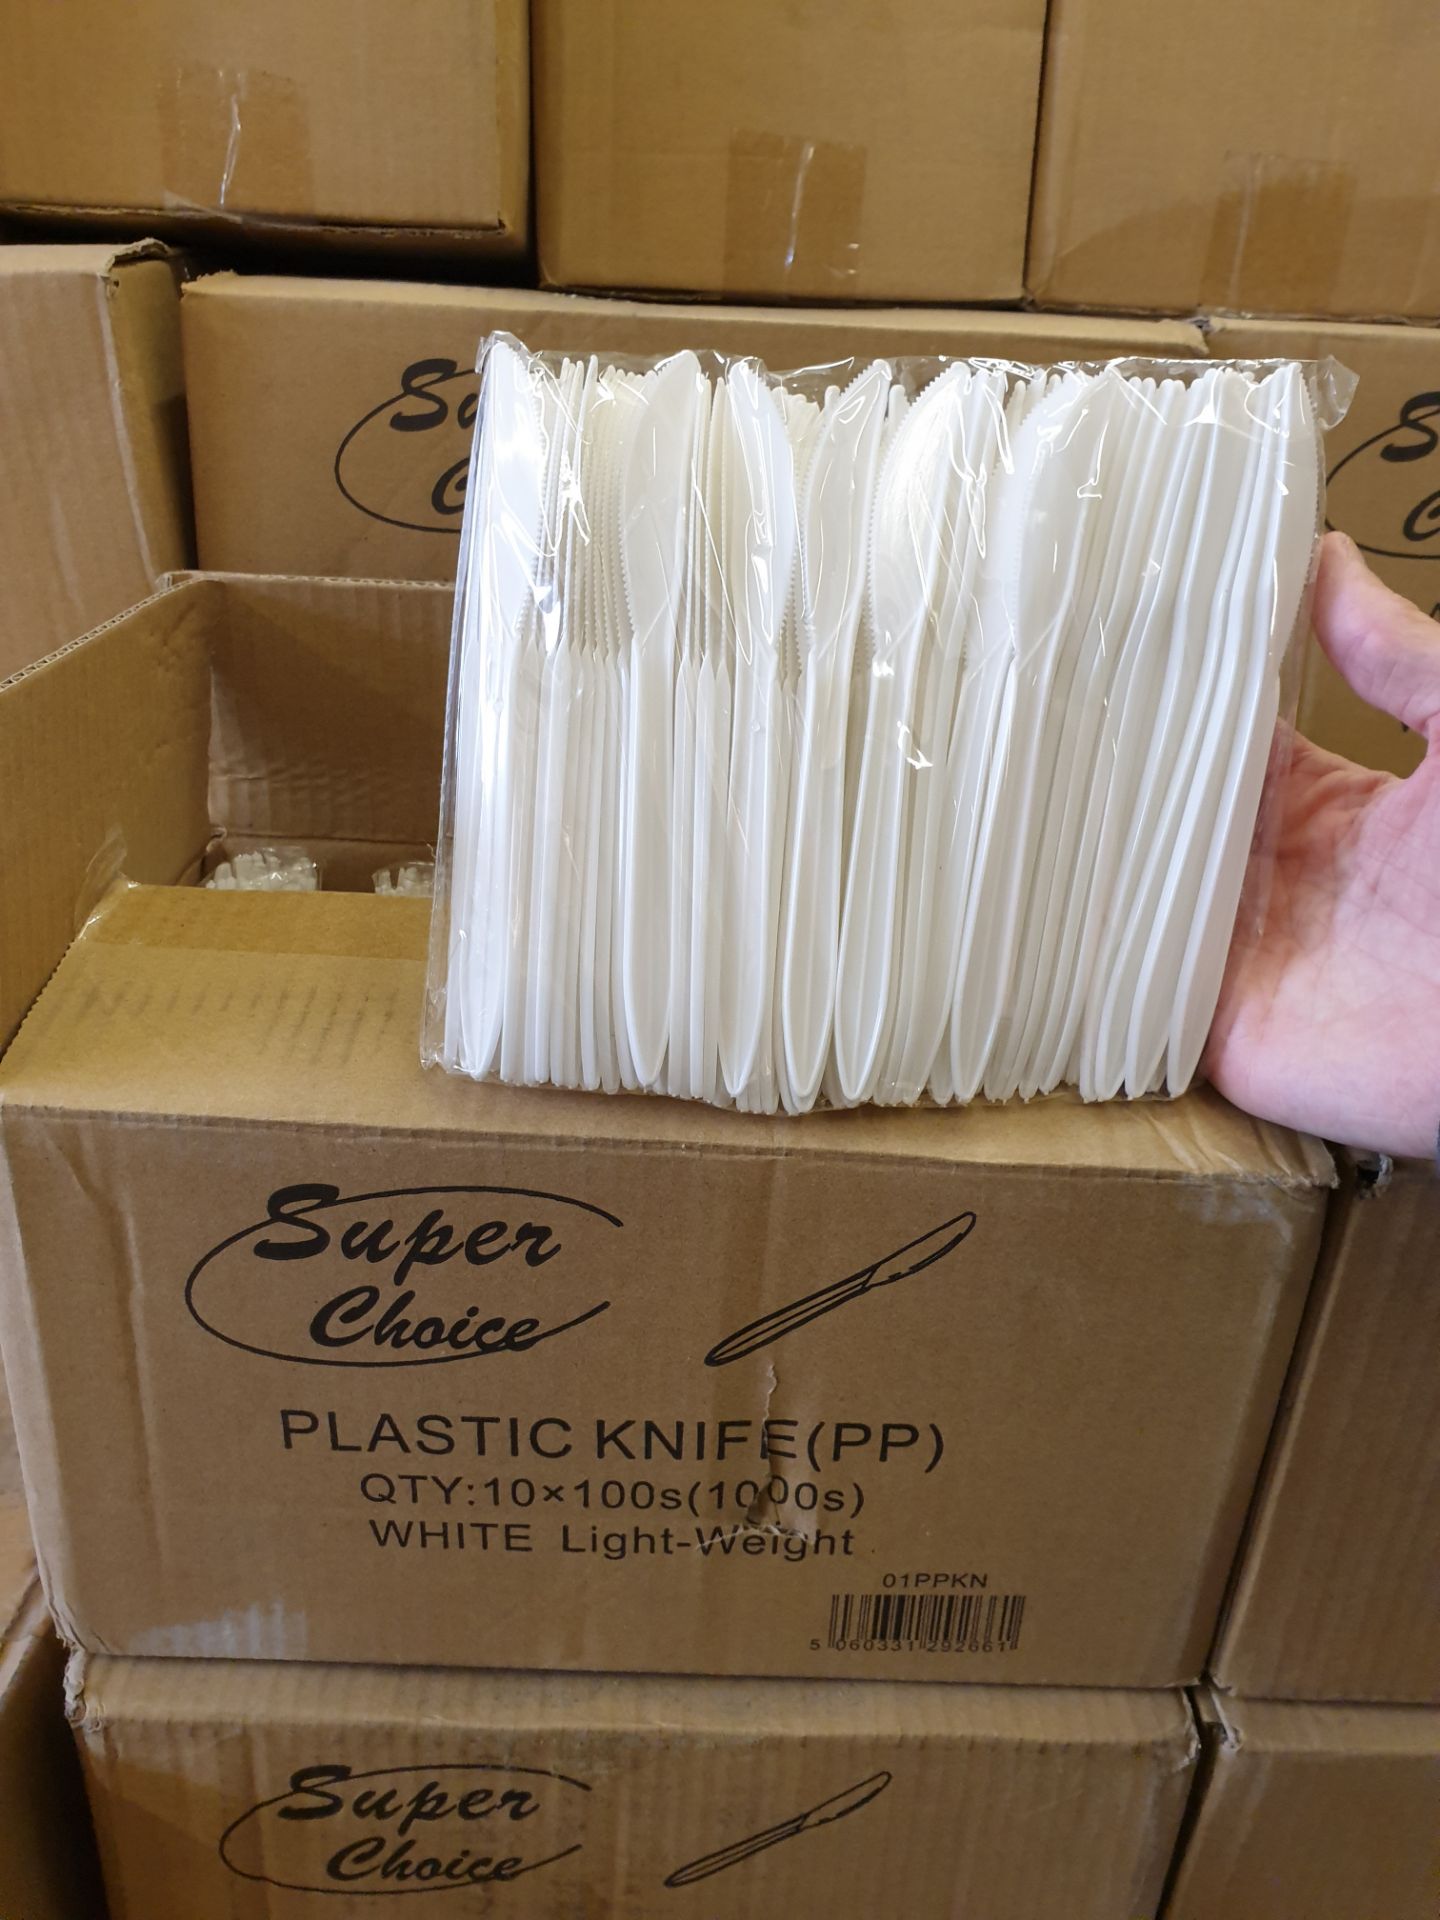 2 x Boxes of 1000 Plastic Knives by Super Choice | DSP5